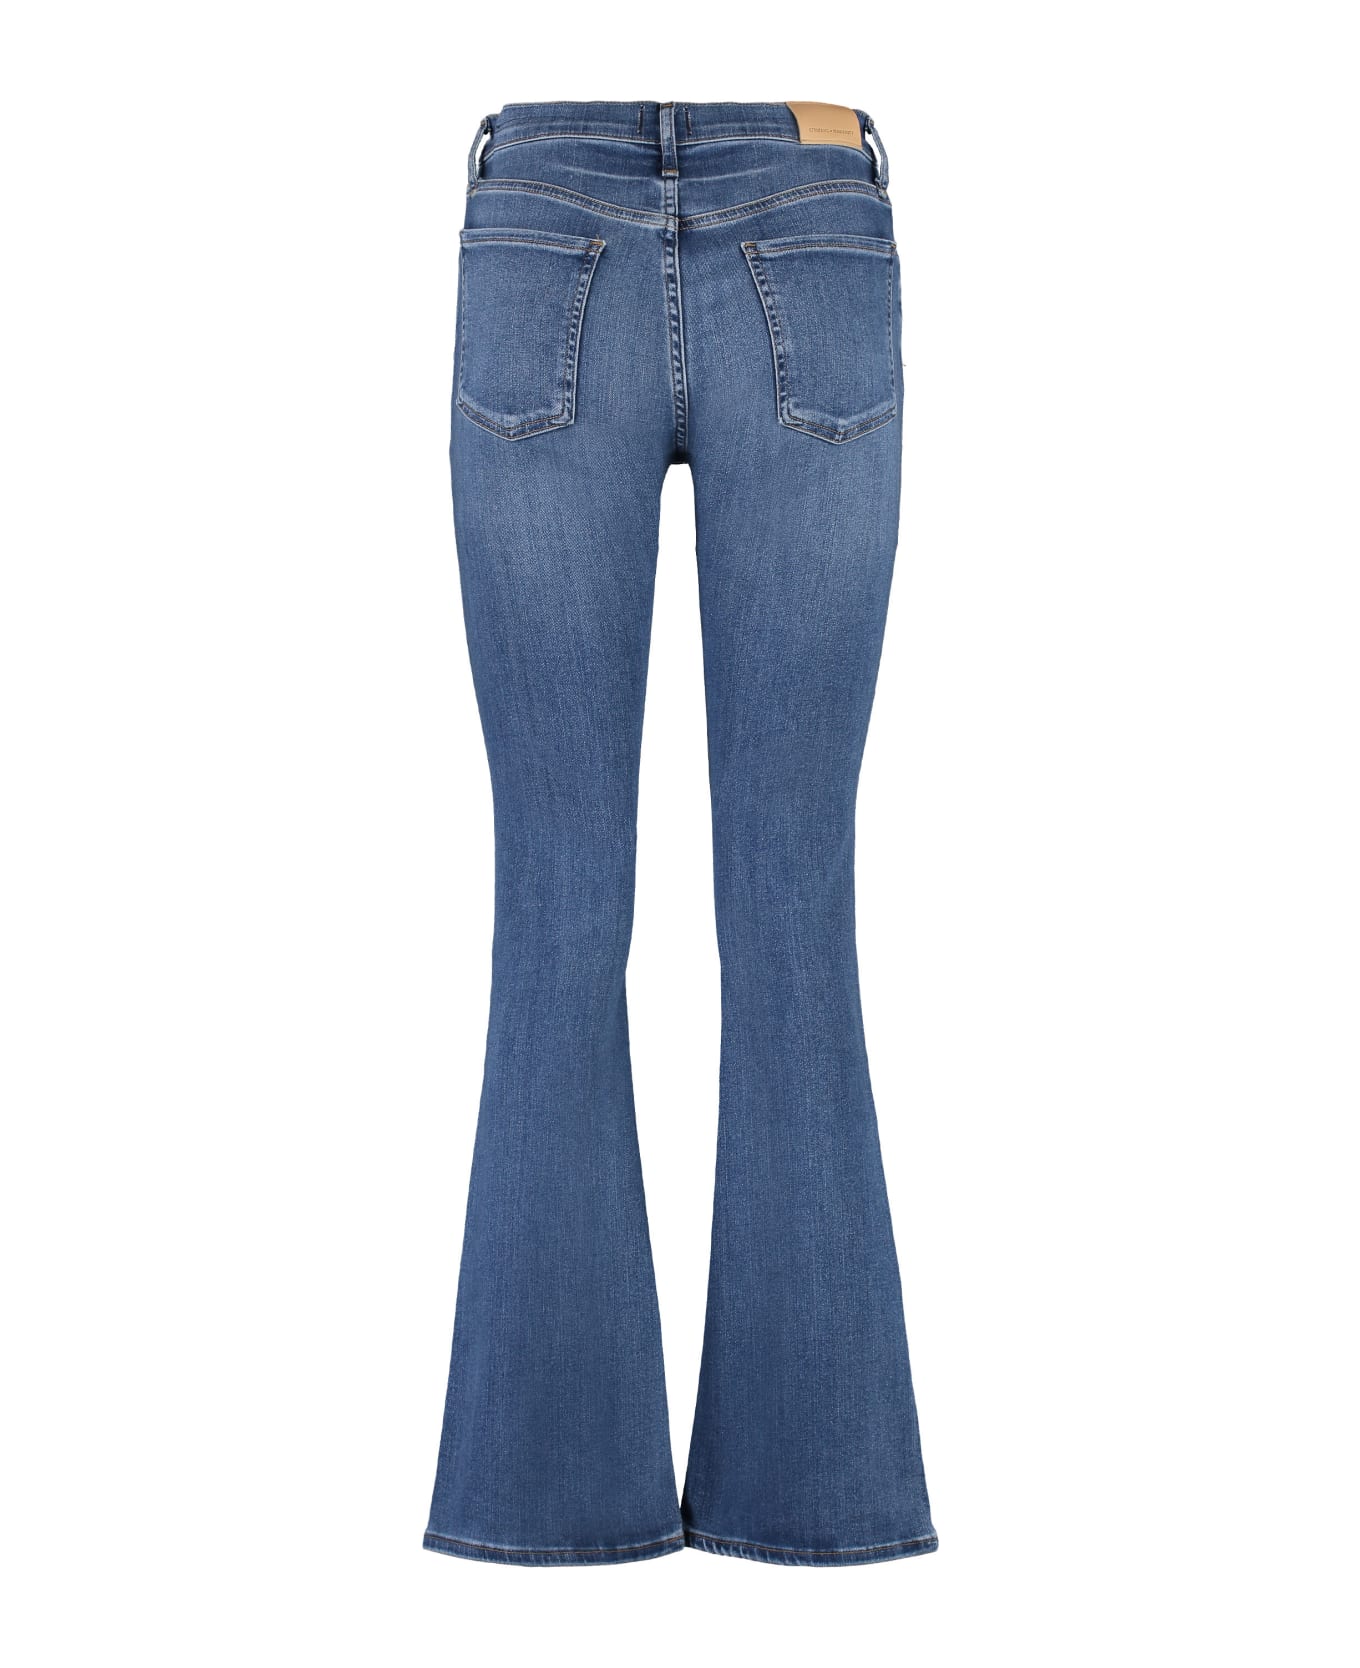 Citizens of Humanity Emannuelle Bootcut Jeans - Denim